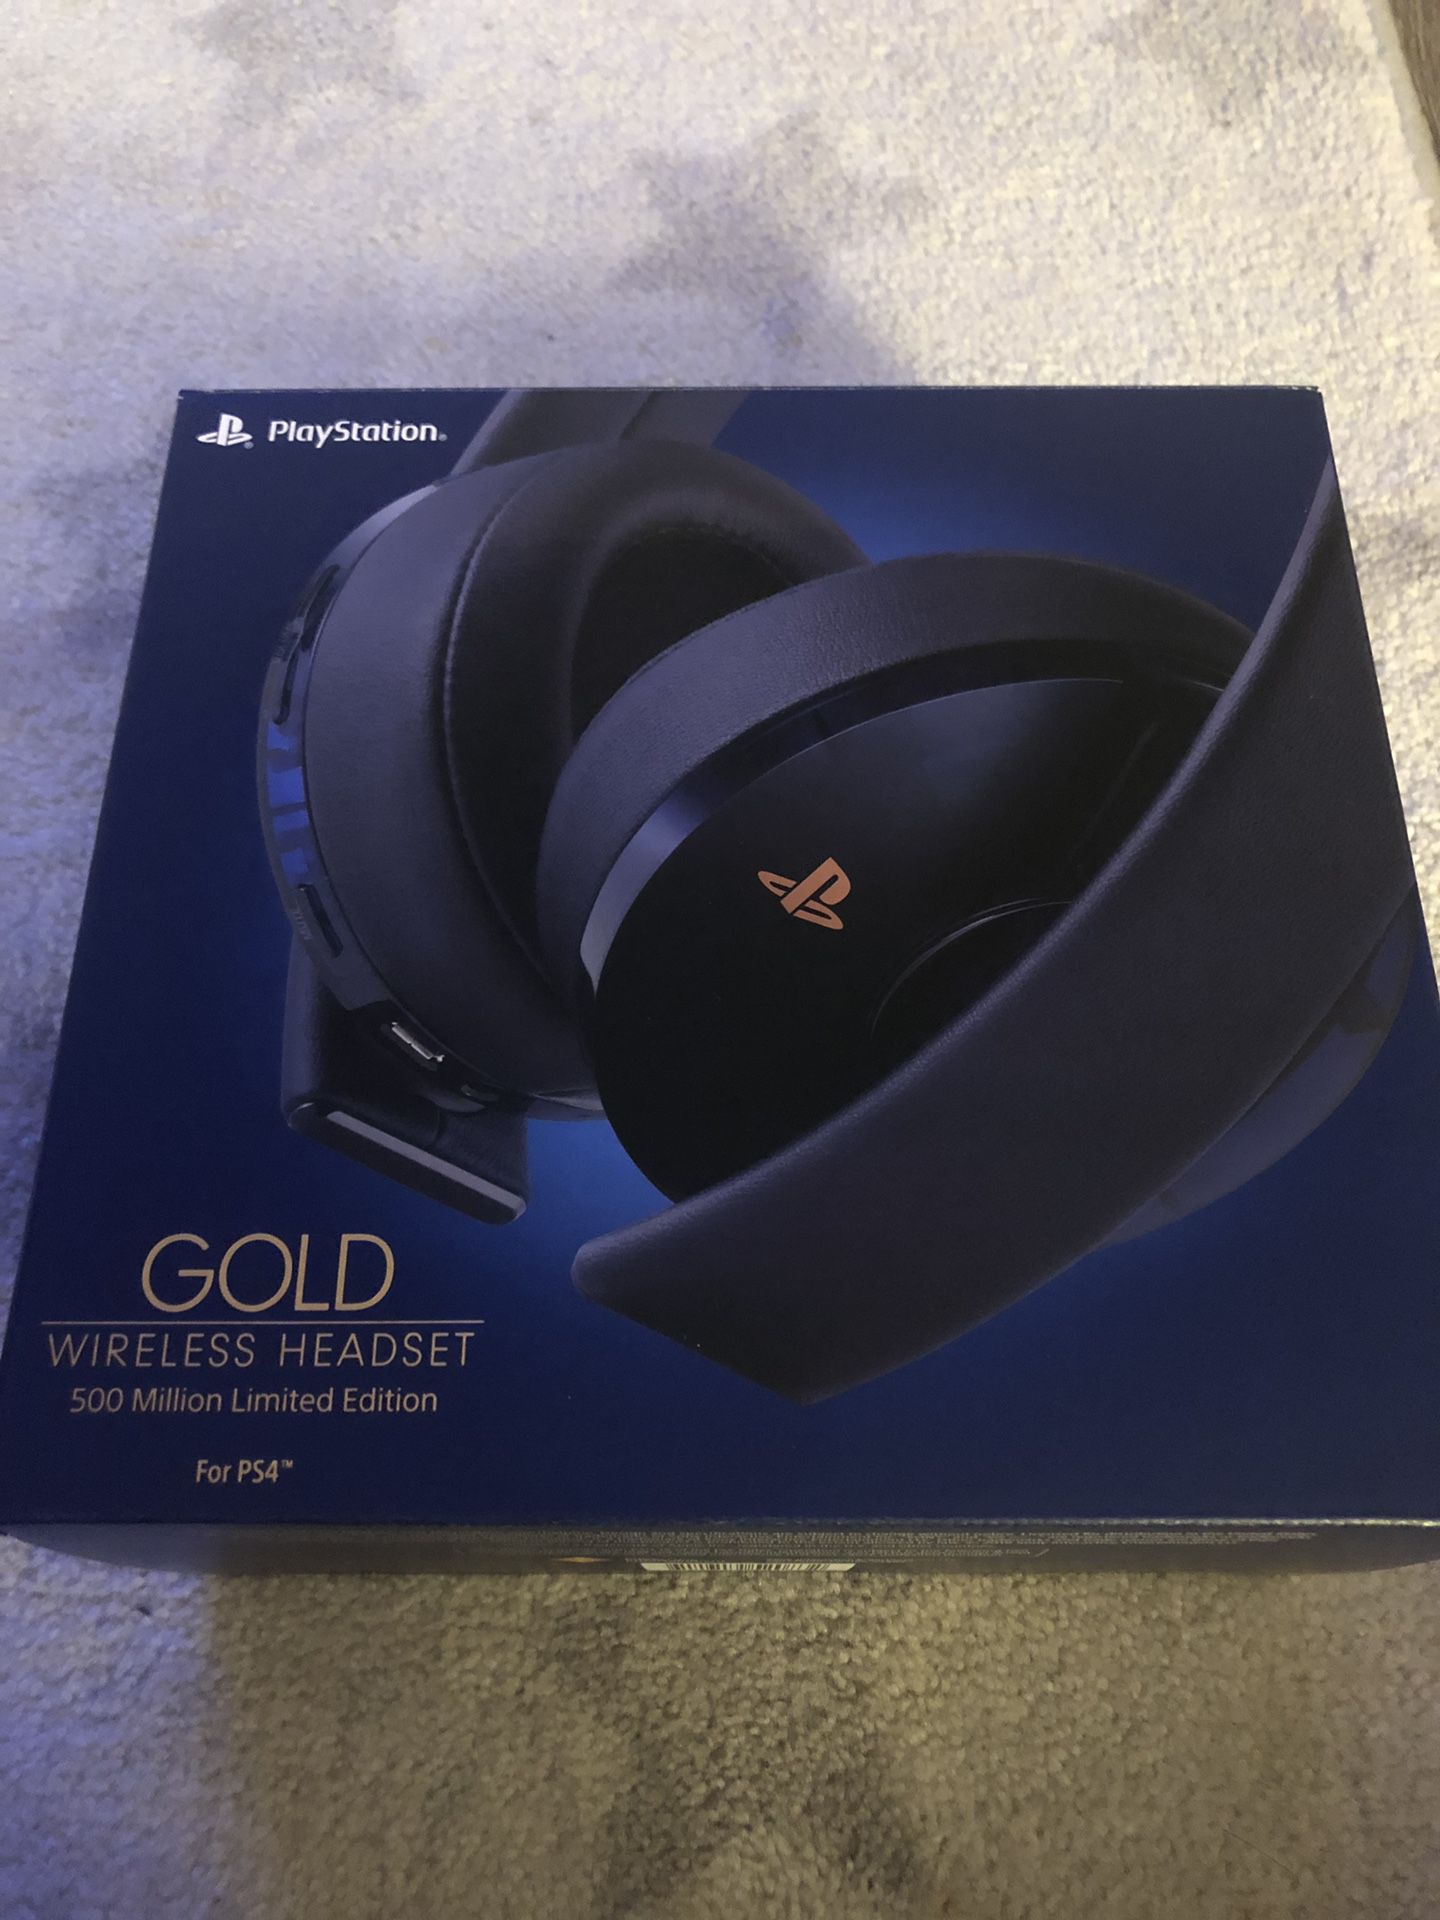 Ps4 500million limited gold headset